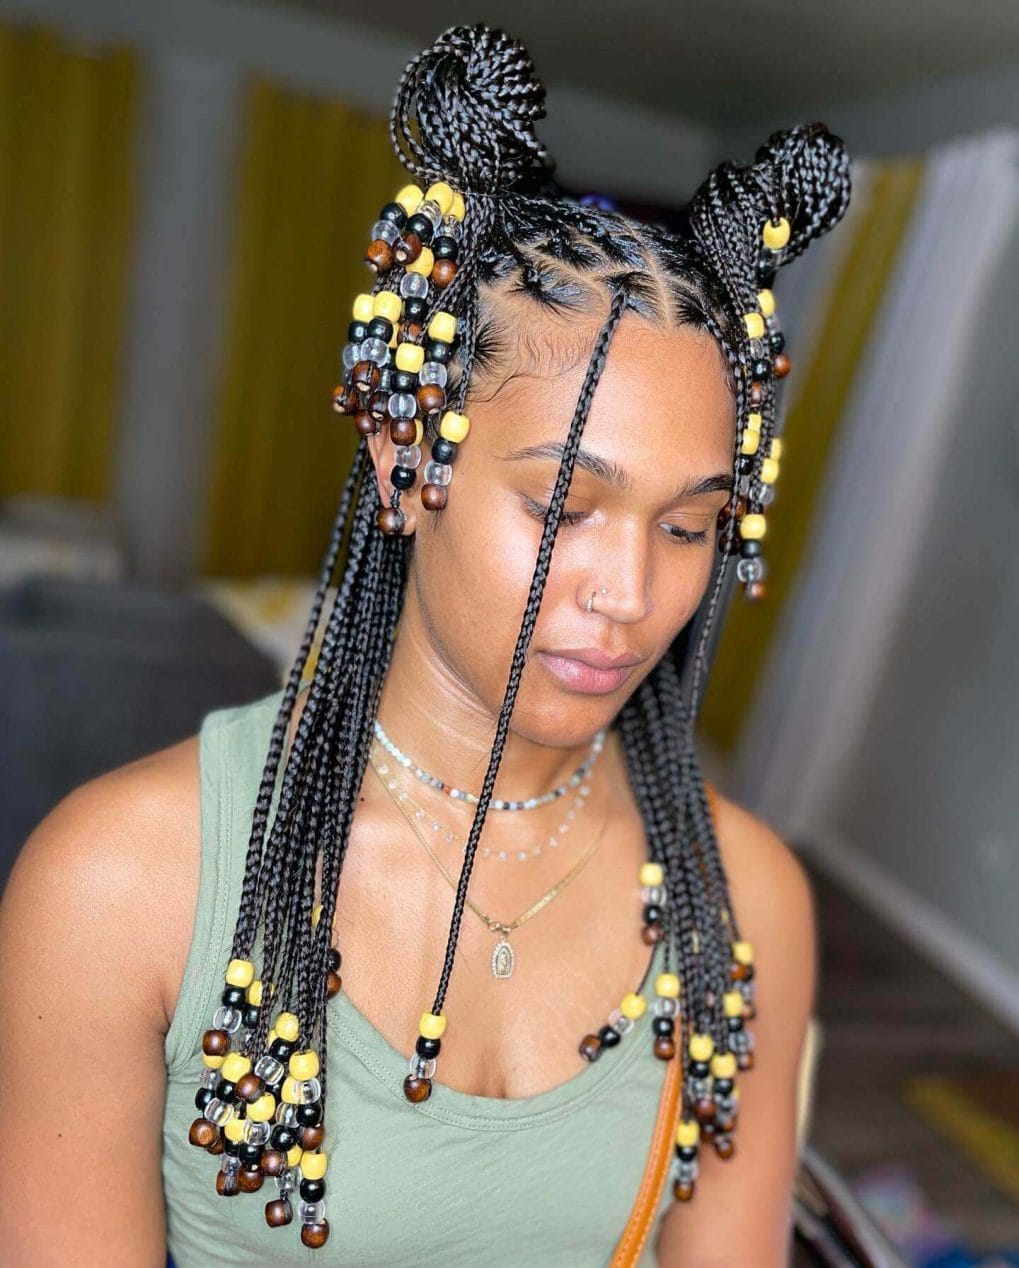 Tightly woven braids in playful buns with black, yellow, and earth-toned beads.